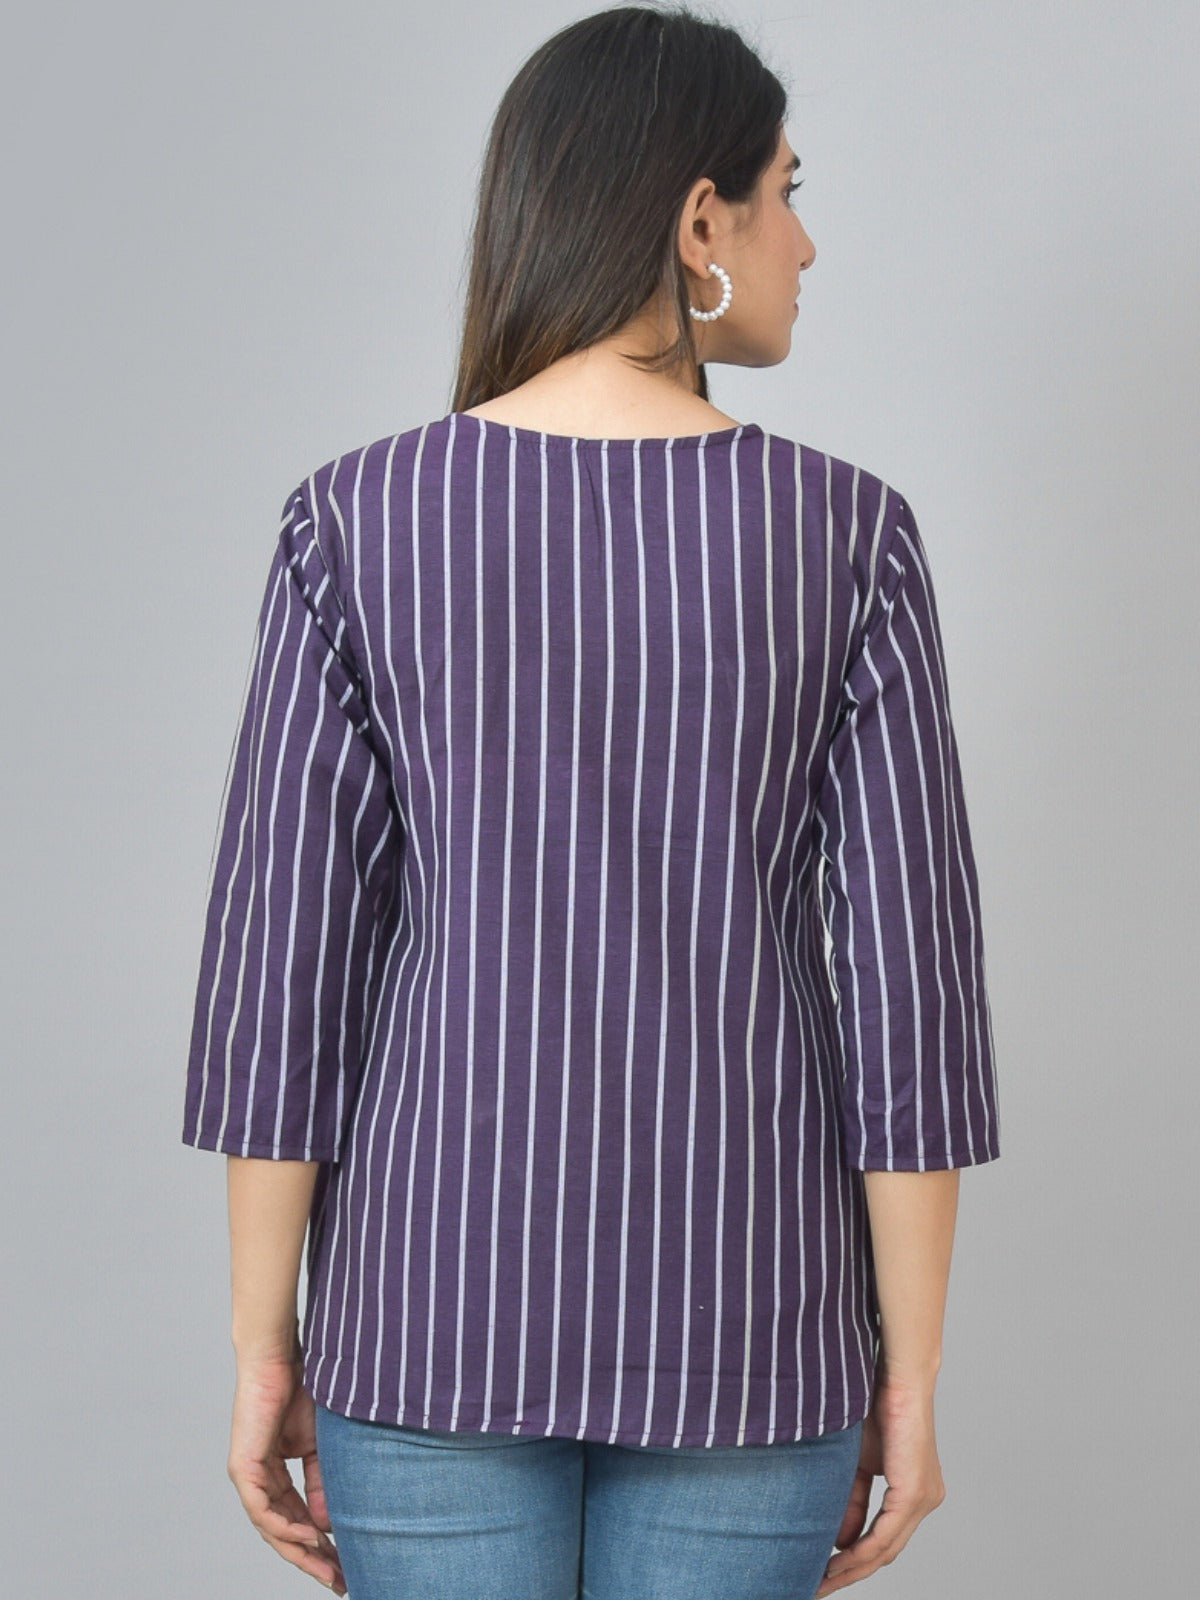 Pack Of 2 Blue And Dark Purple Striped Cotton Womens Top Combo